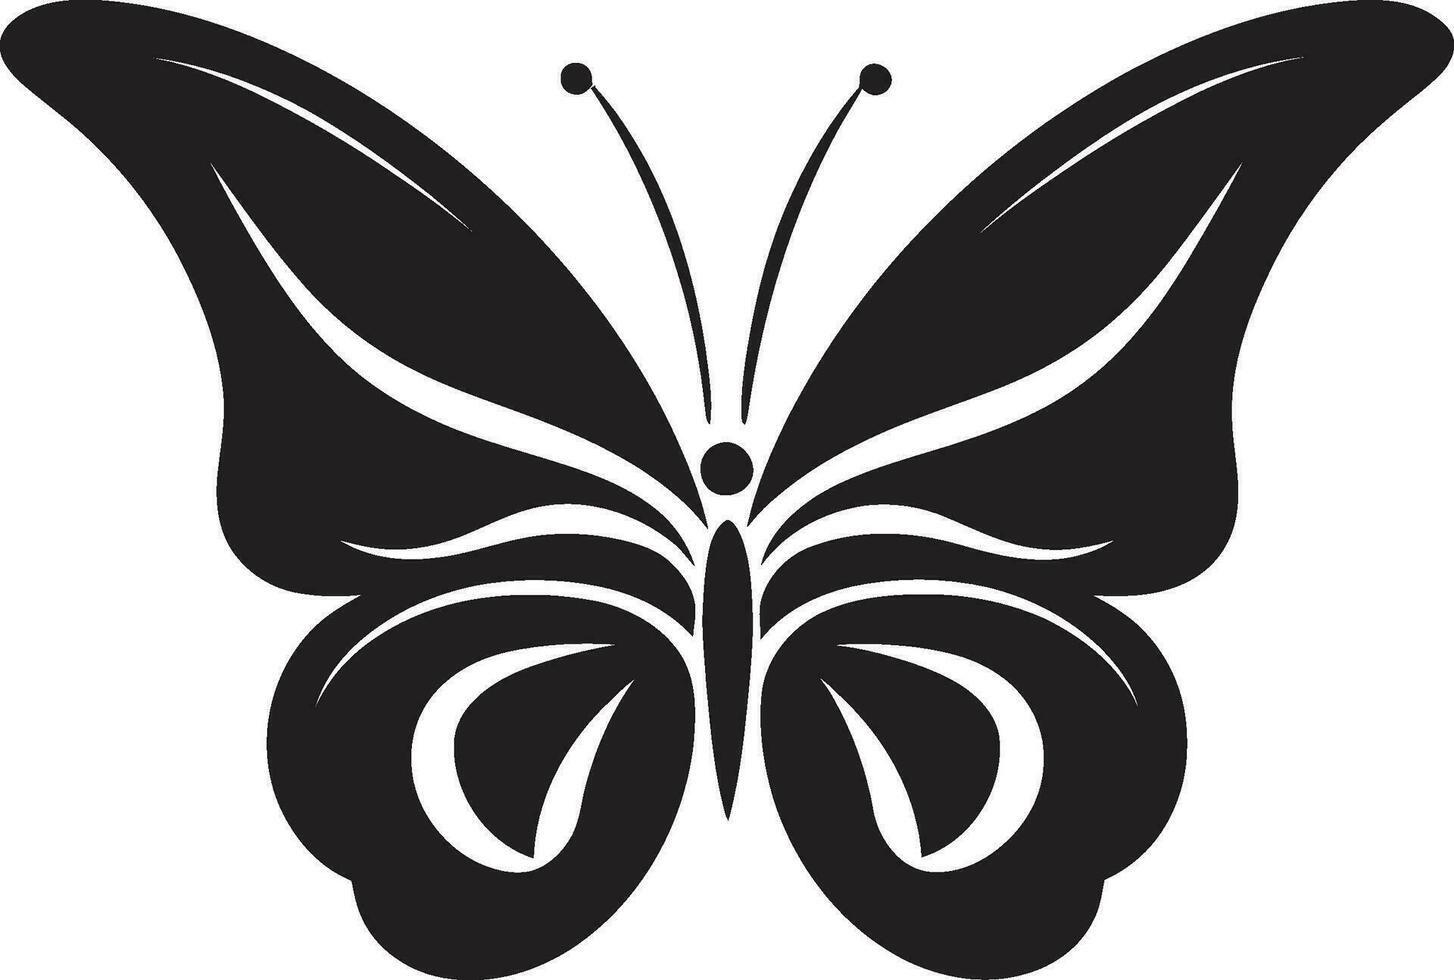 Artistic Simplicity Butterfly Symbol in Black Crafted Beauty in Motion Black Butterfly Design vector